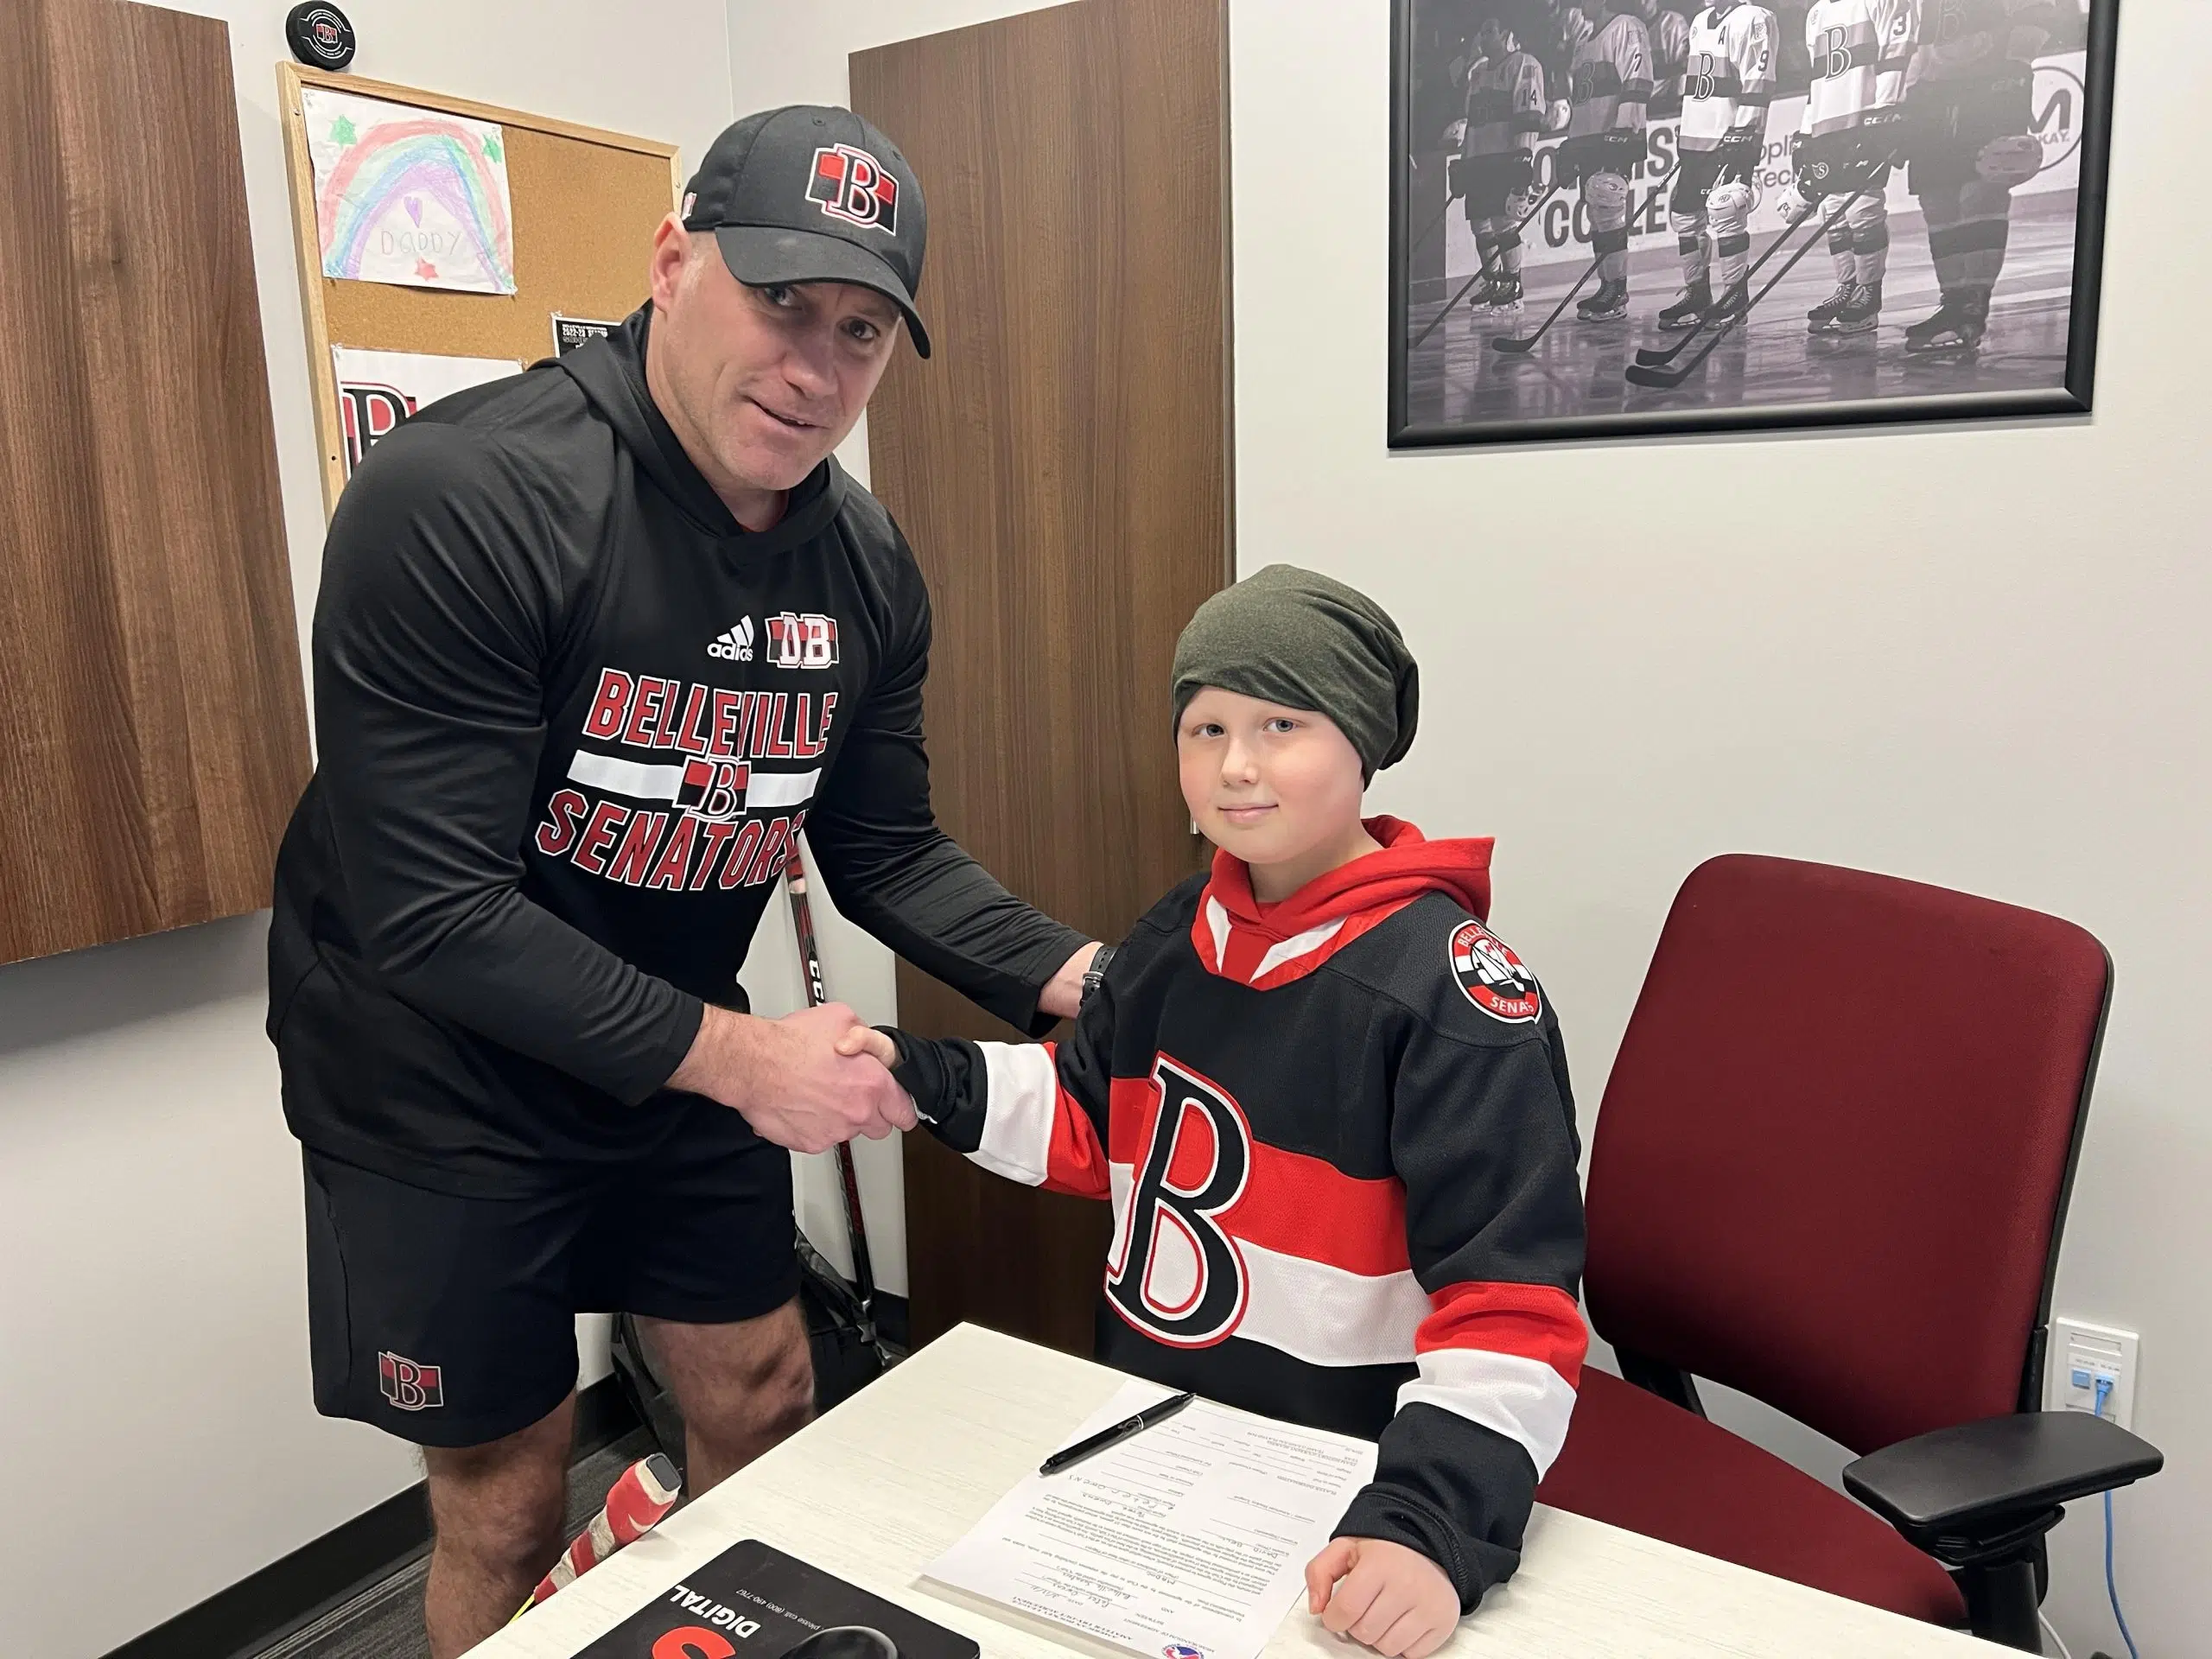 8-year-old Centre Hastings boy signs one-day contract with Belleville Senators